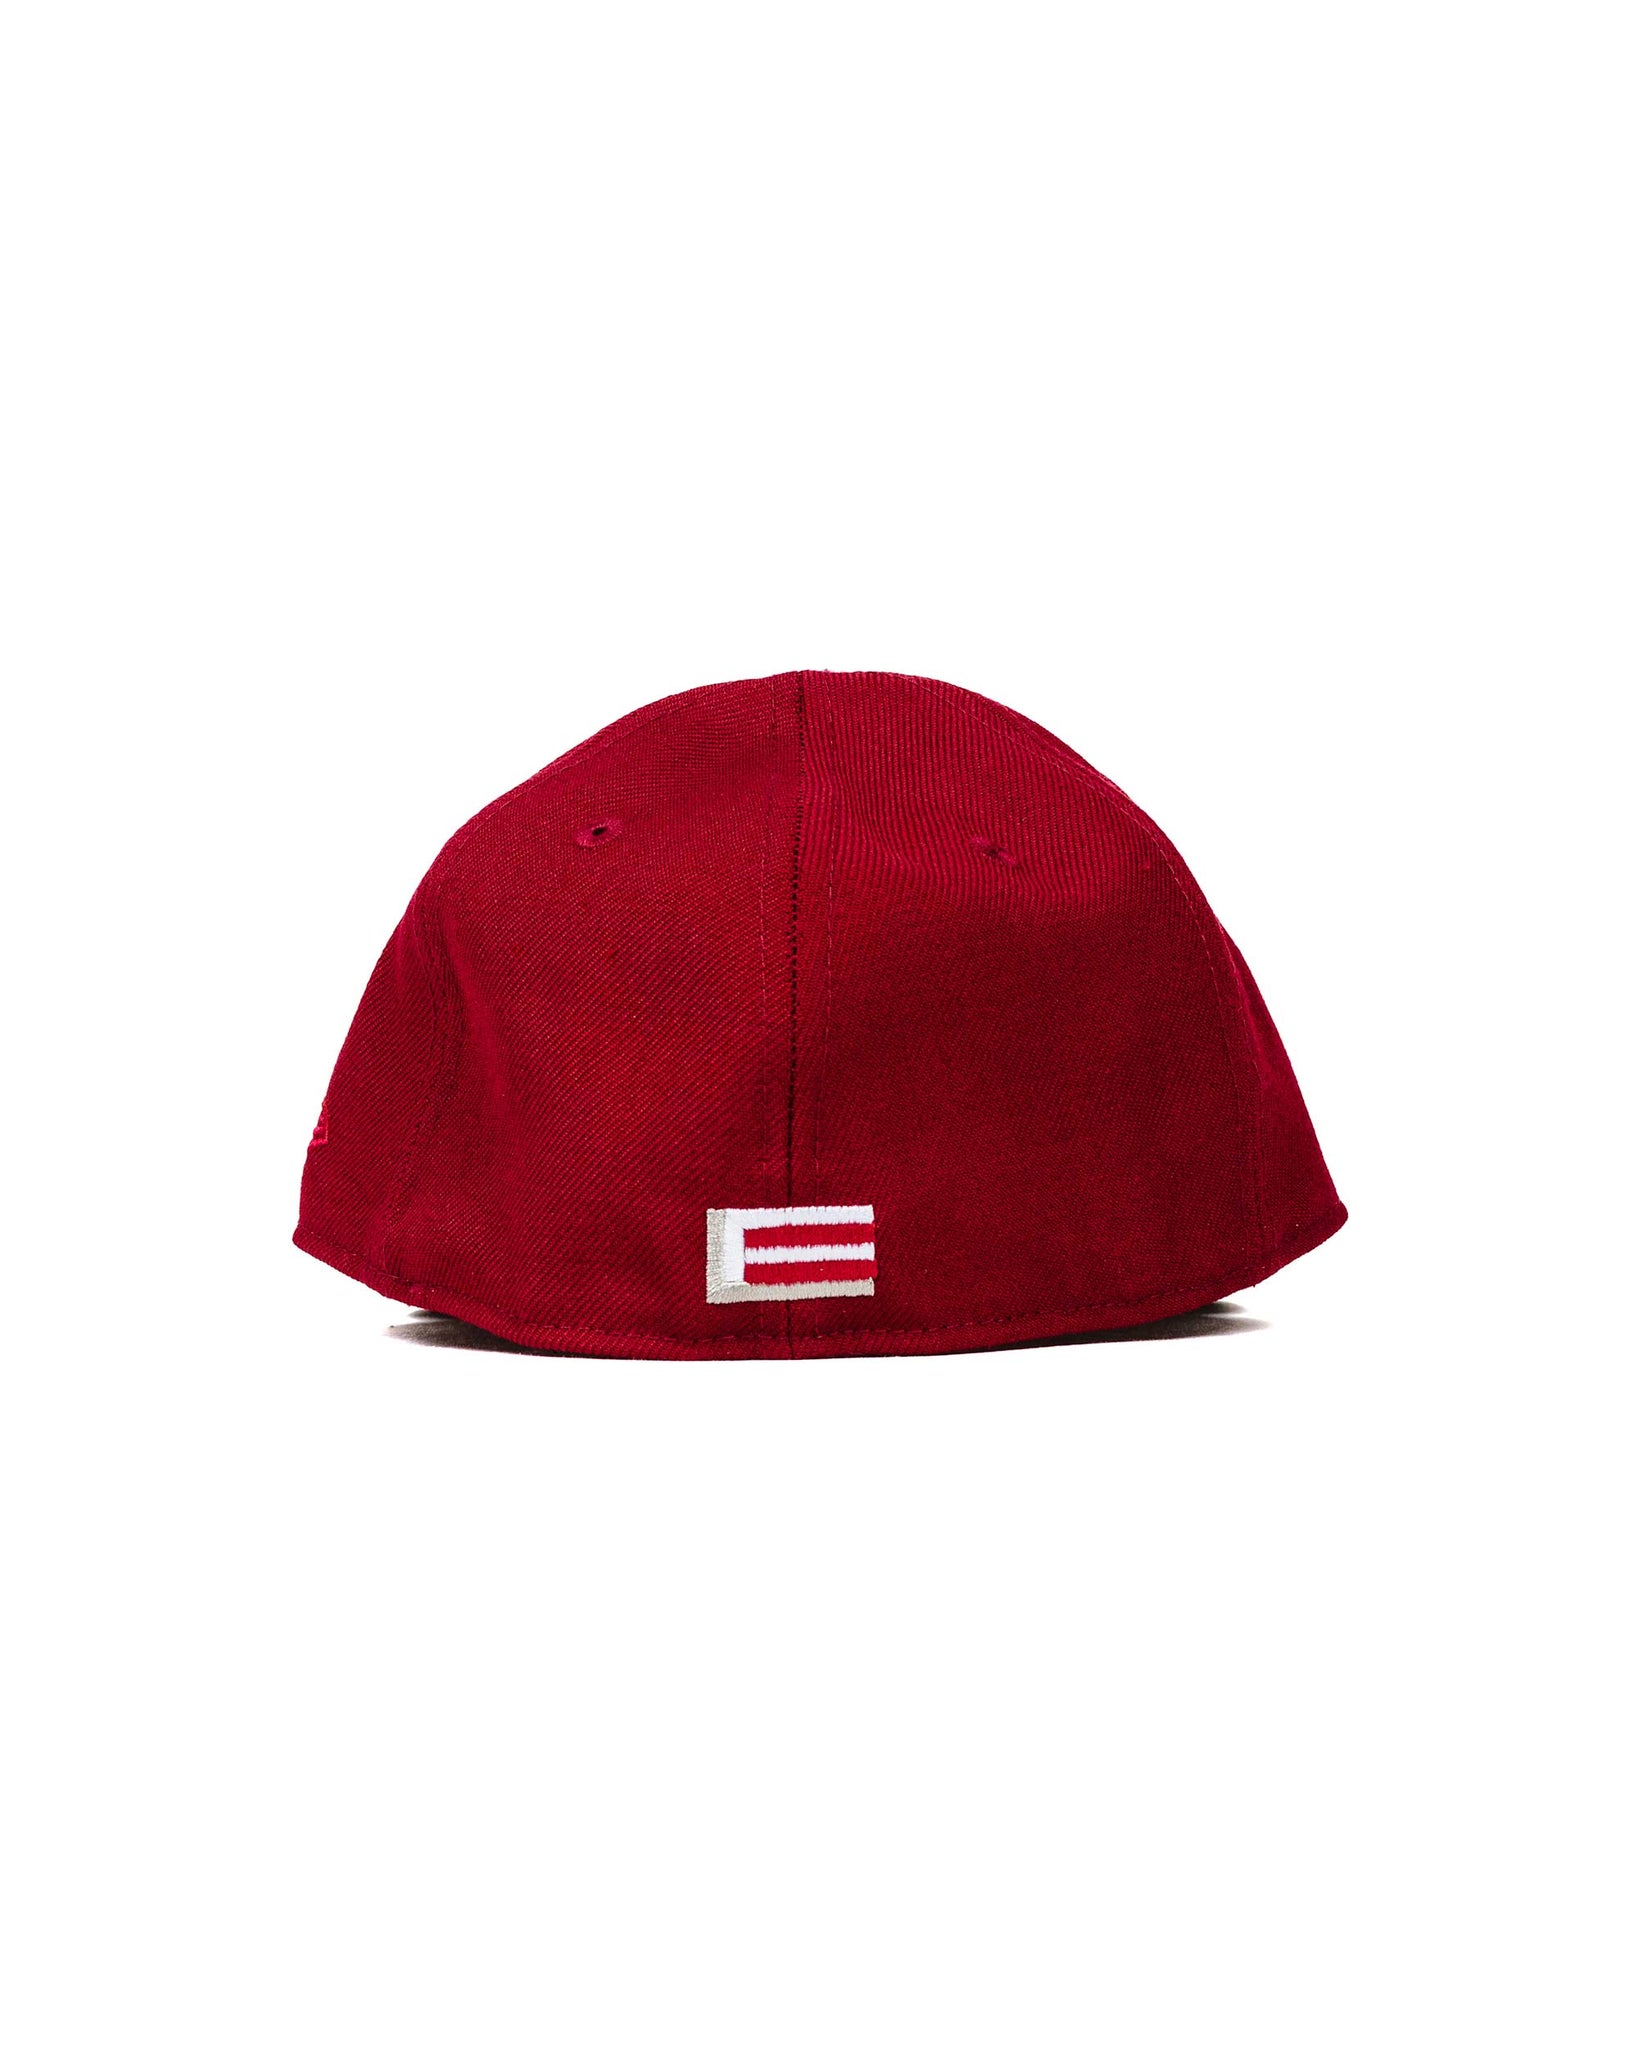 Lost & Found x New Era Low Profile 59FIFTY Cap Burgundy Back